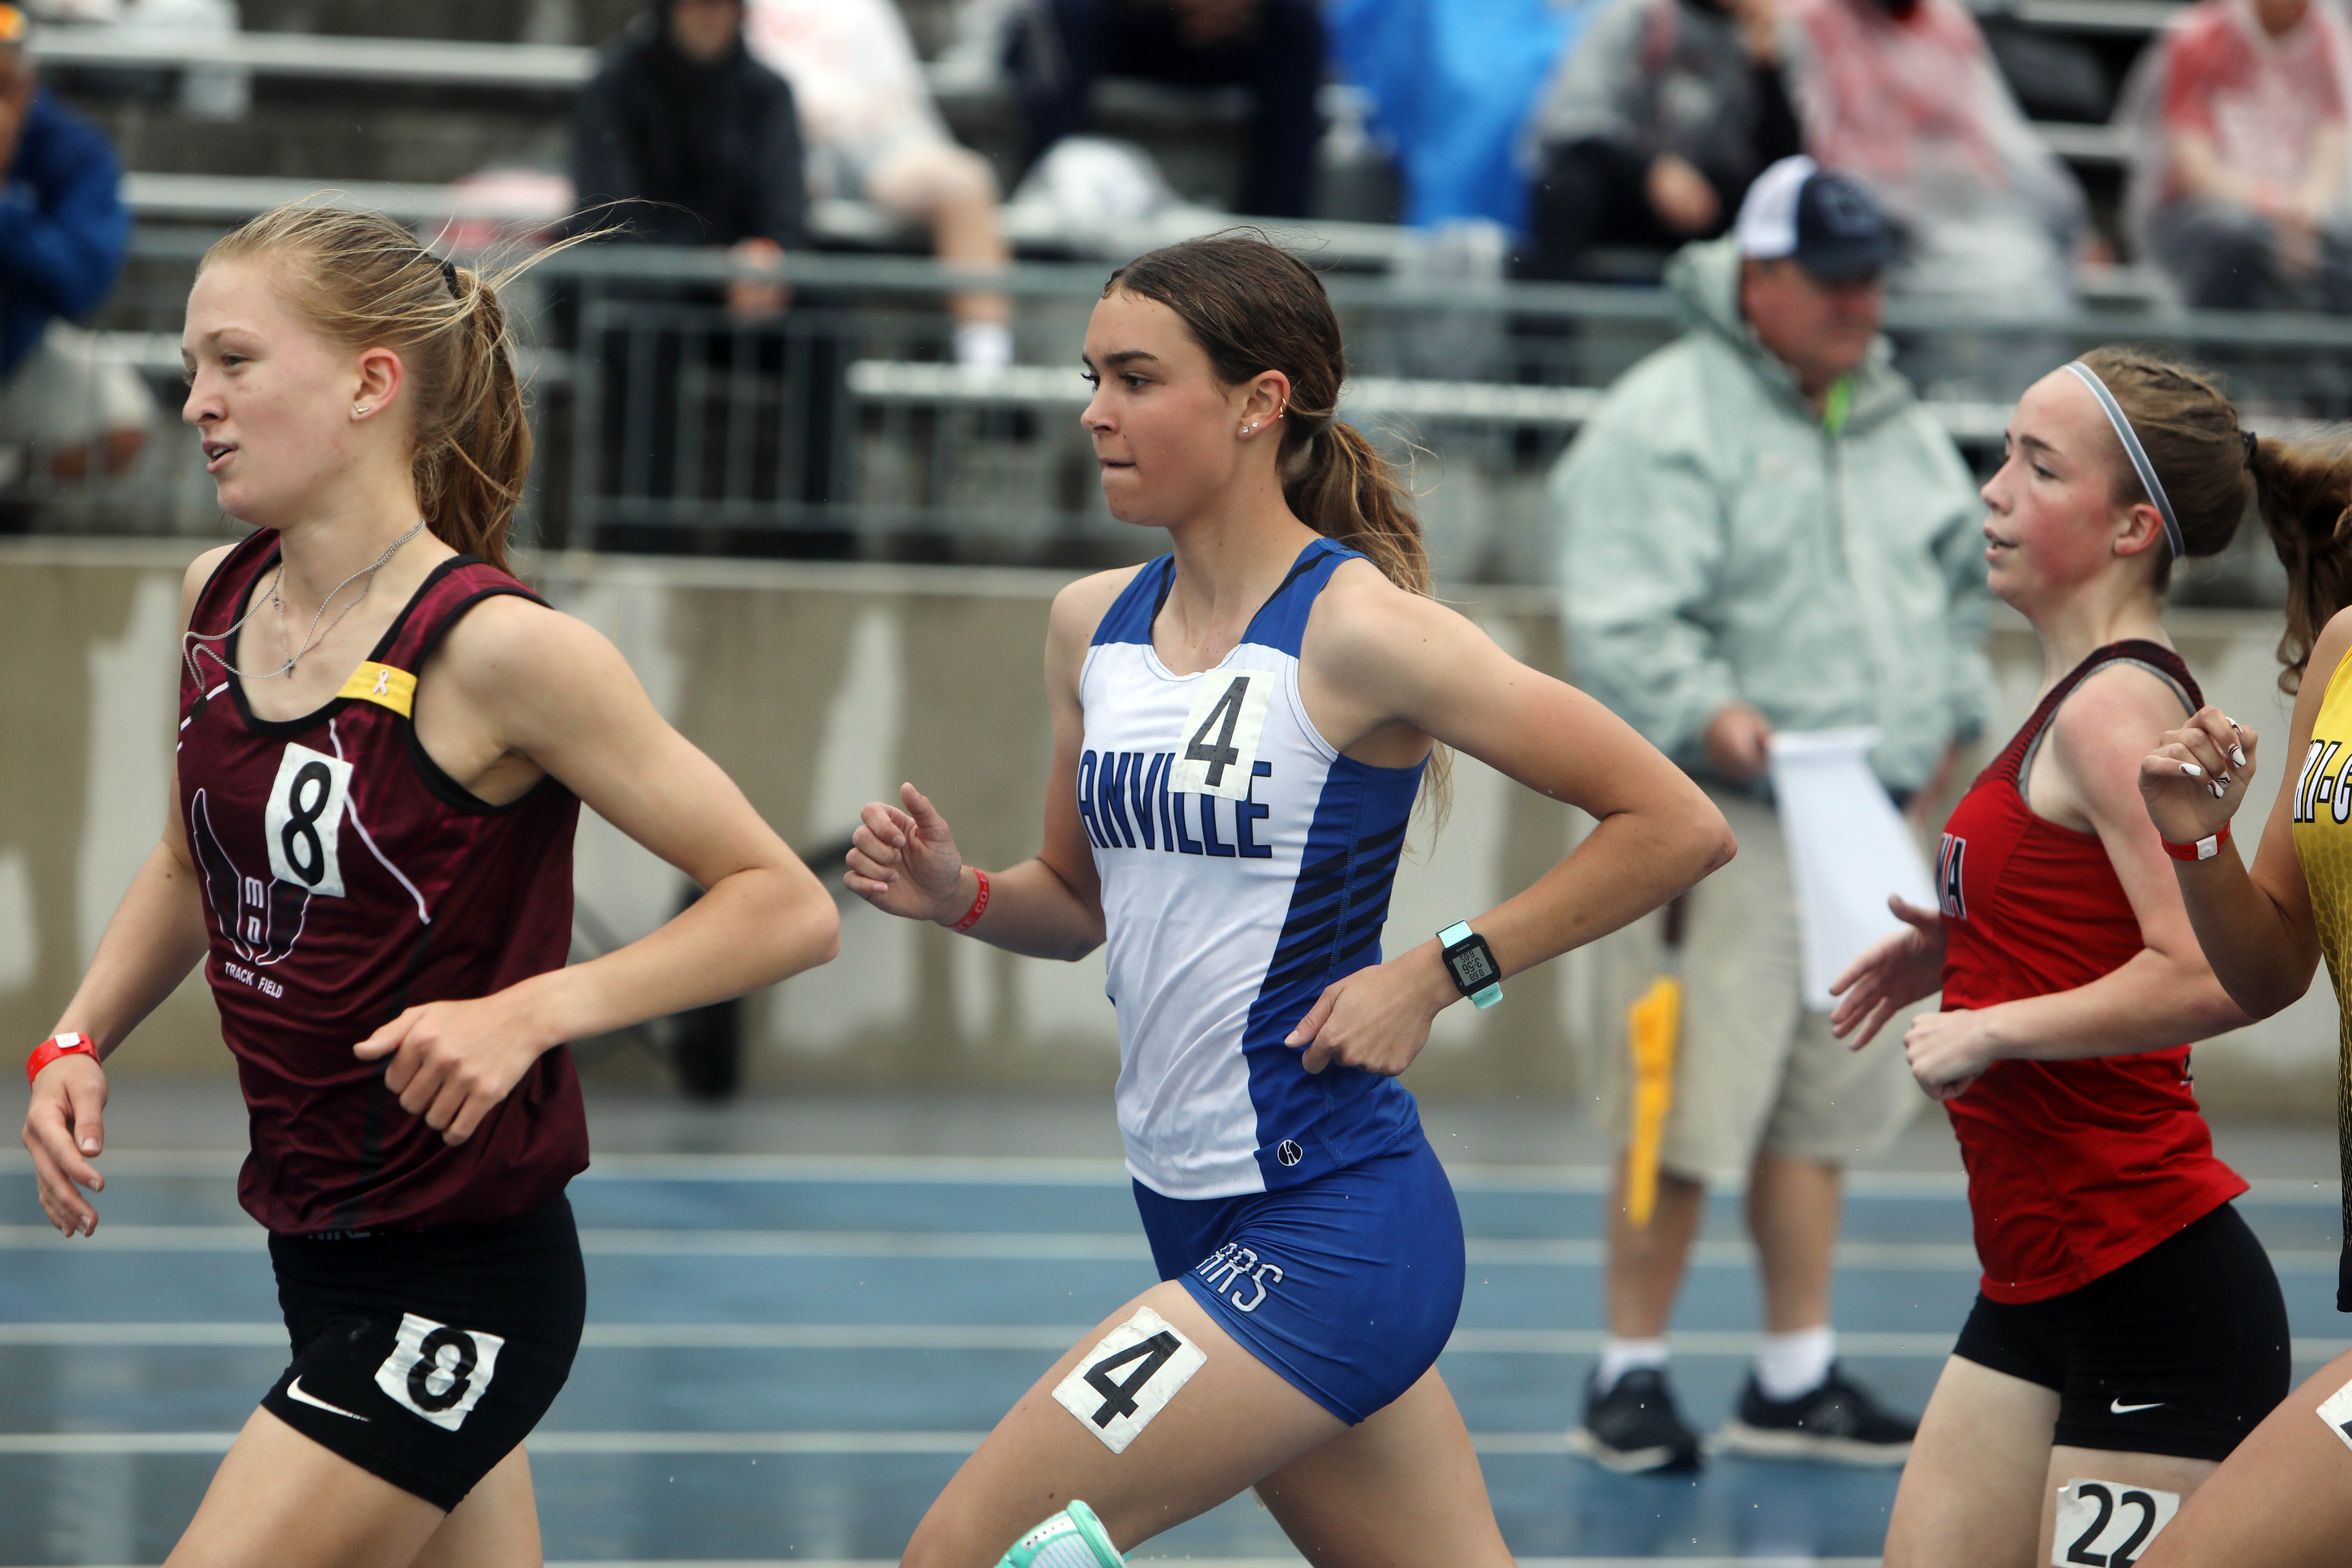 Iowa high school state track meet recap, results of Friday's events